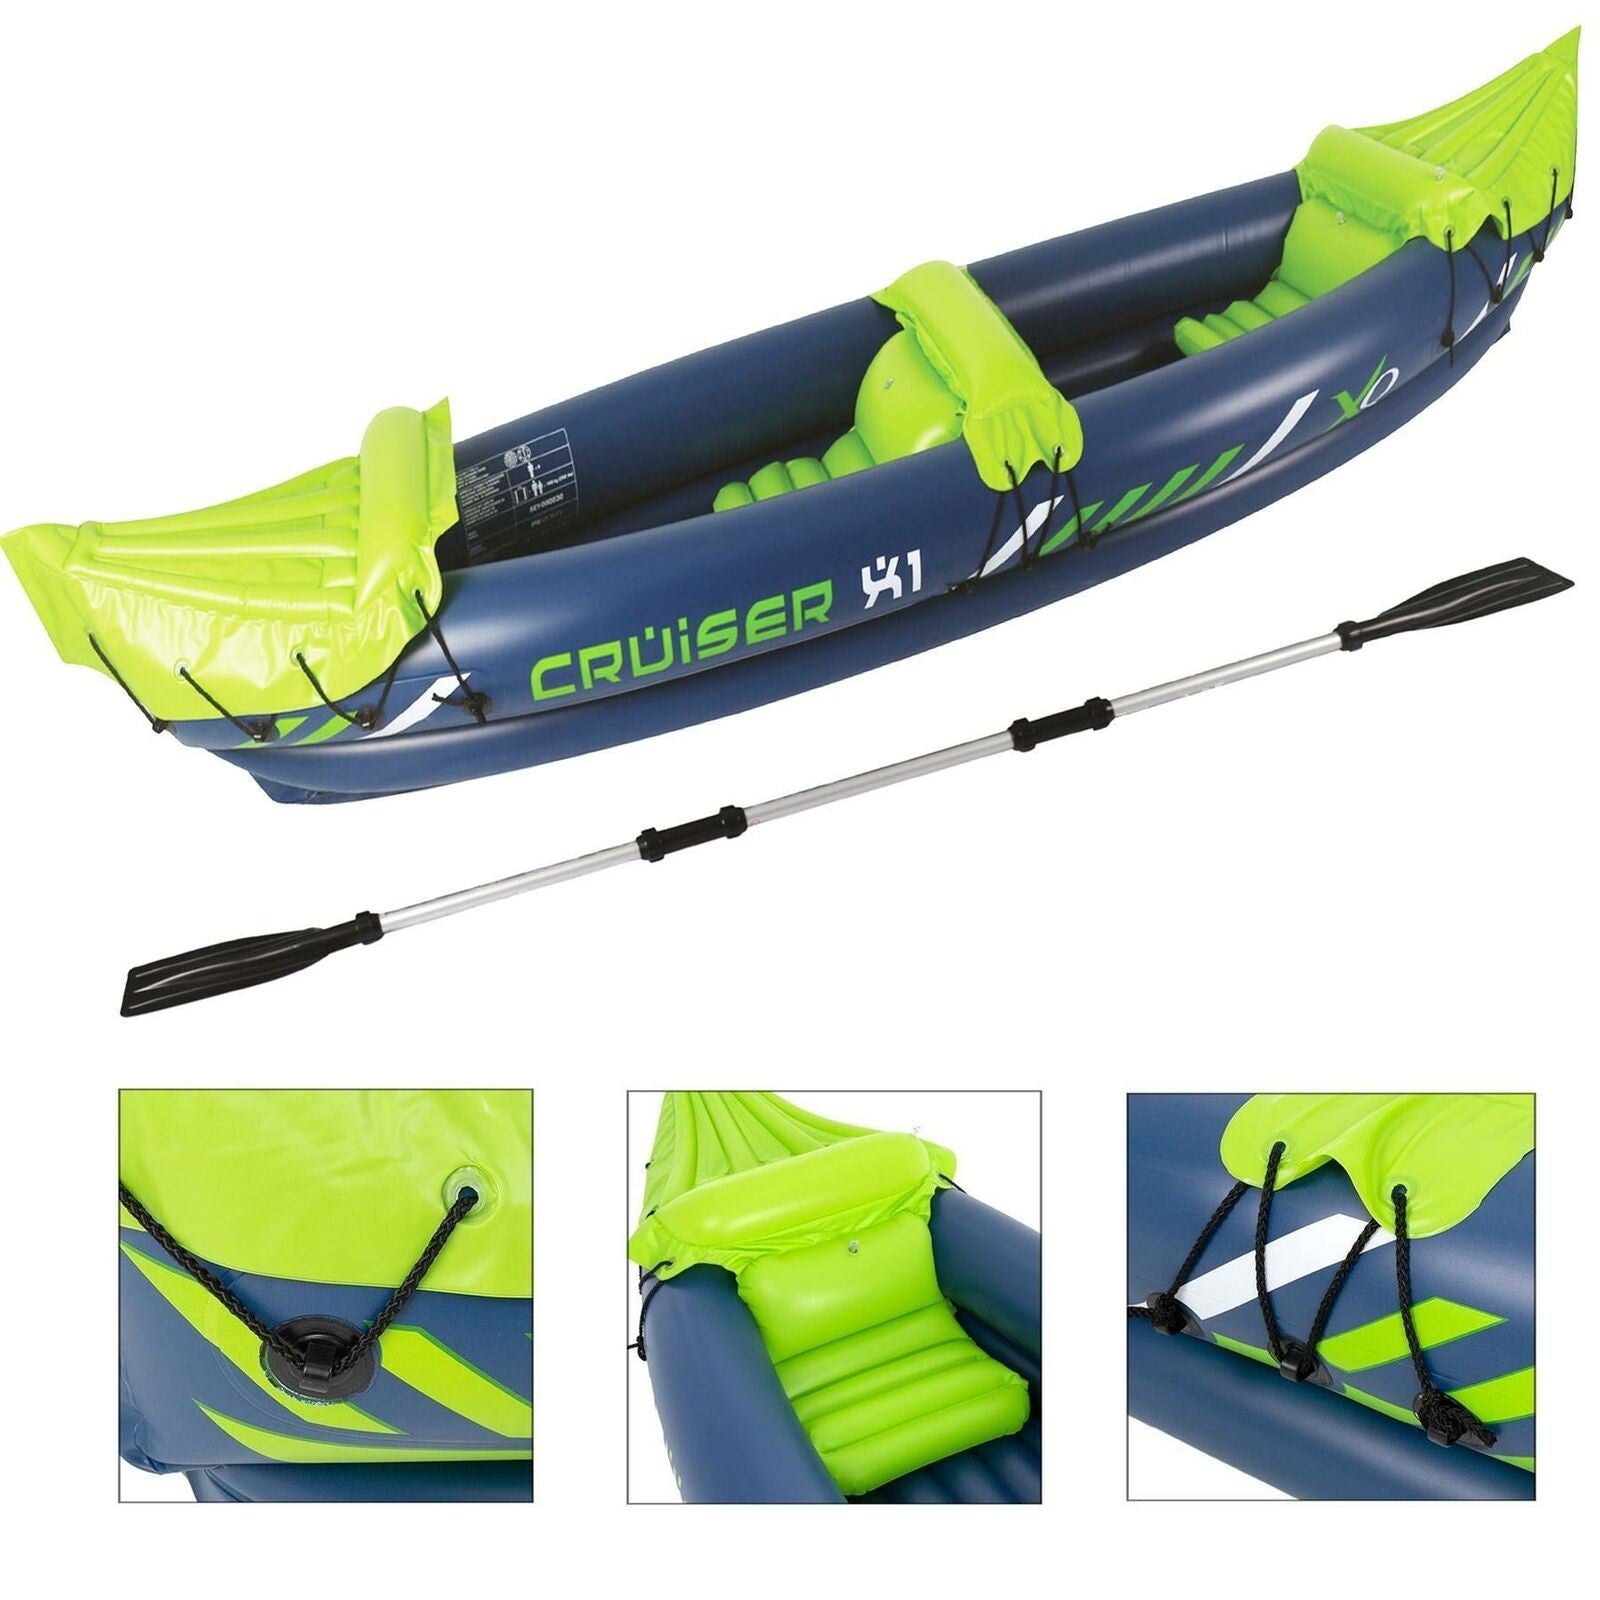 gHOST-7 Inflatable Canoe Kayak Dinghy Boat with Double Paddle 2 - Person by Geezy - UKBuyZone